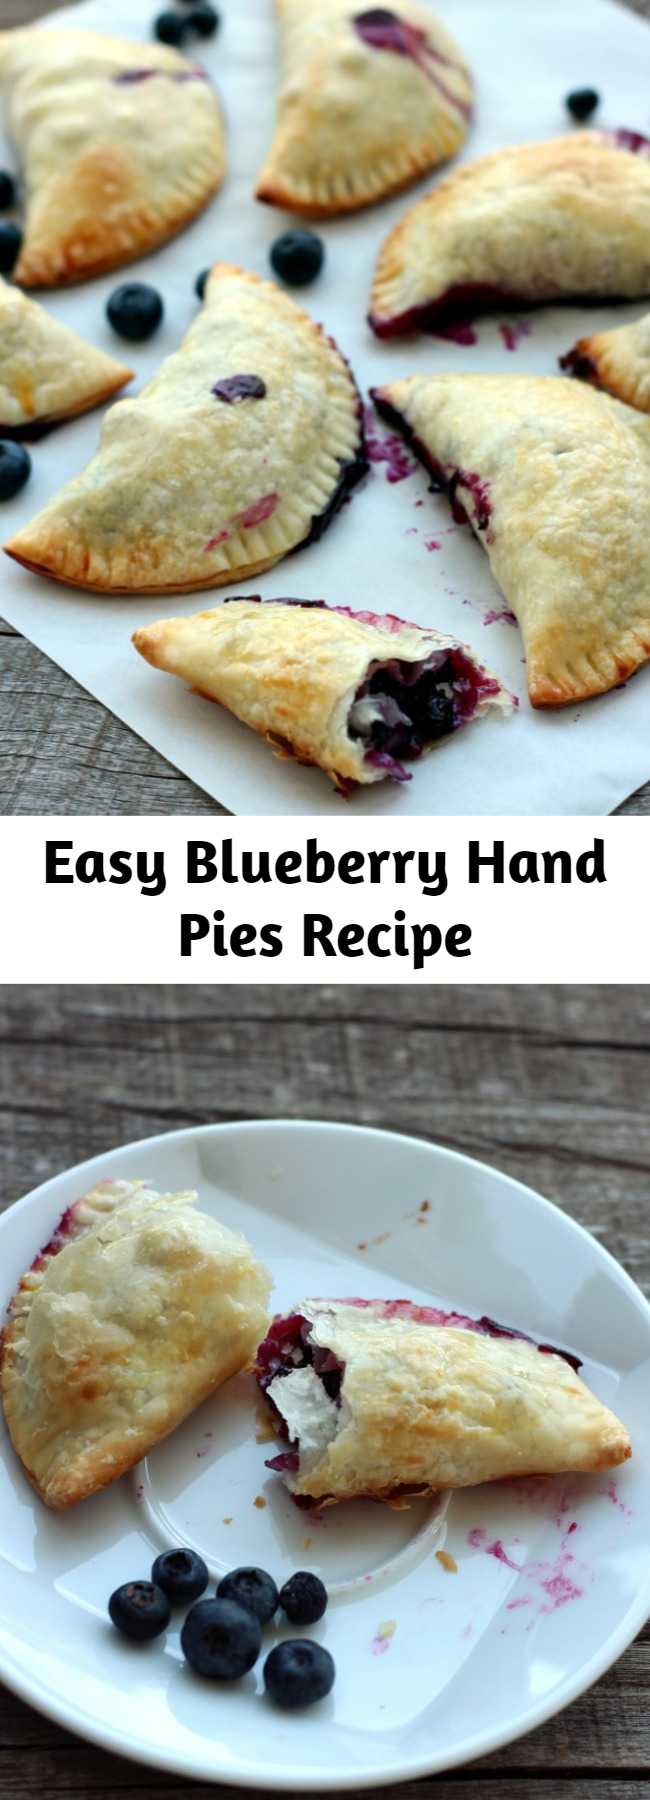 Easy Blueberry Hand Pies Recipe - A flaky, crispy crust on the outside and warm blueberries spilling with their juices inside – definitely a keeper and a quick fix for afternoon tea.